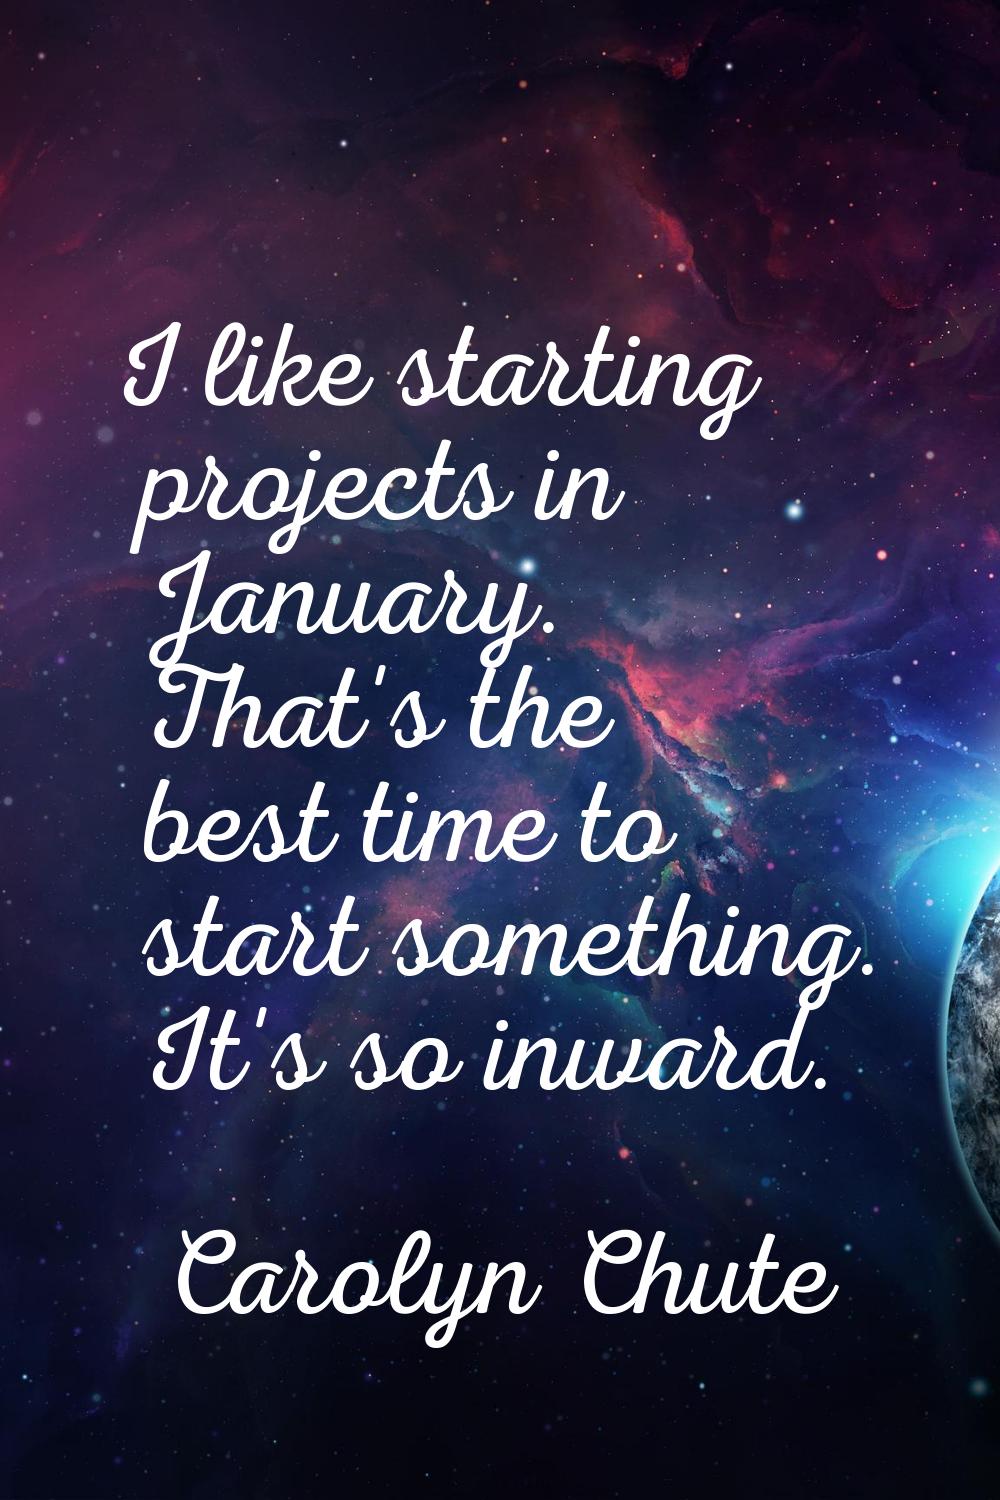 I like starting projects in January. That's the best time to start something. It's so inward.